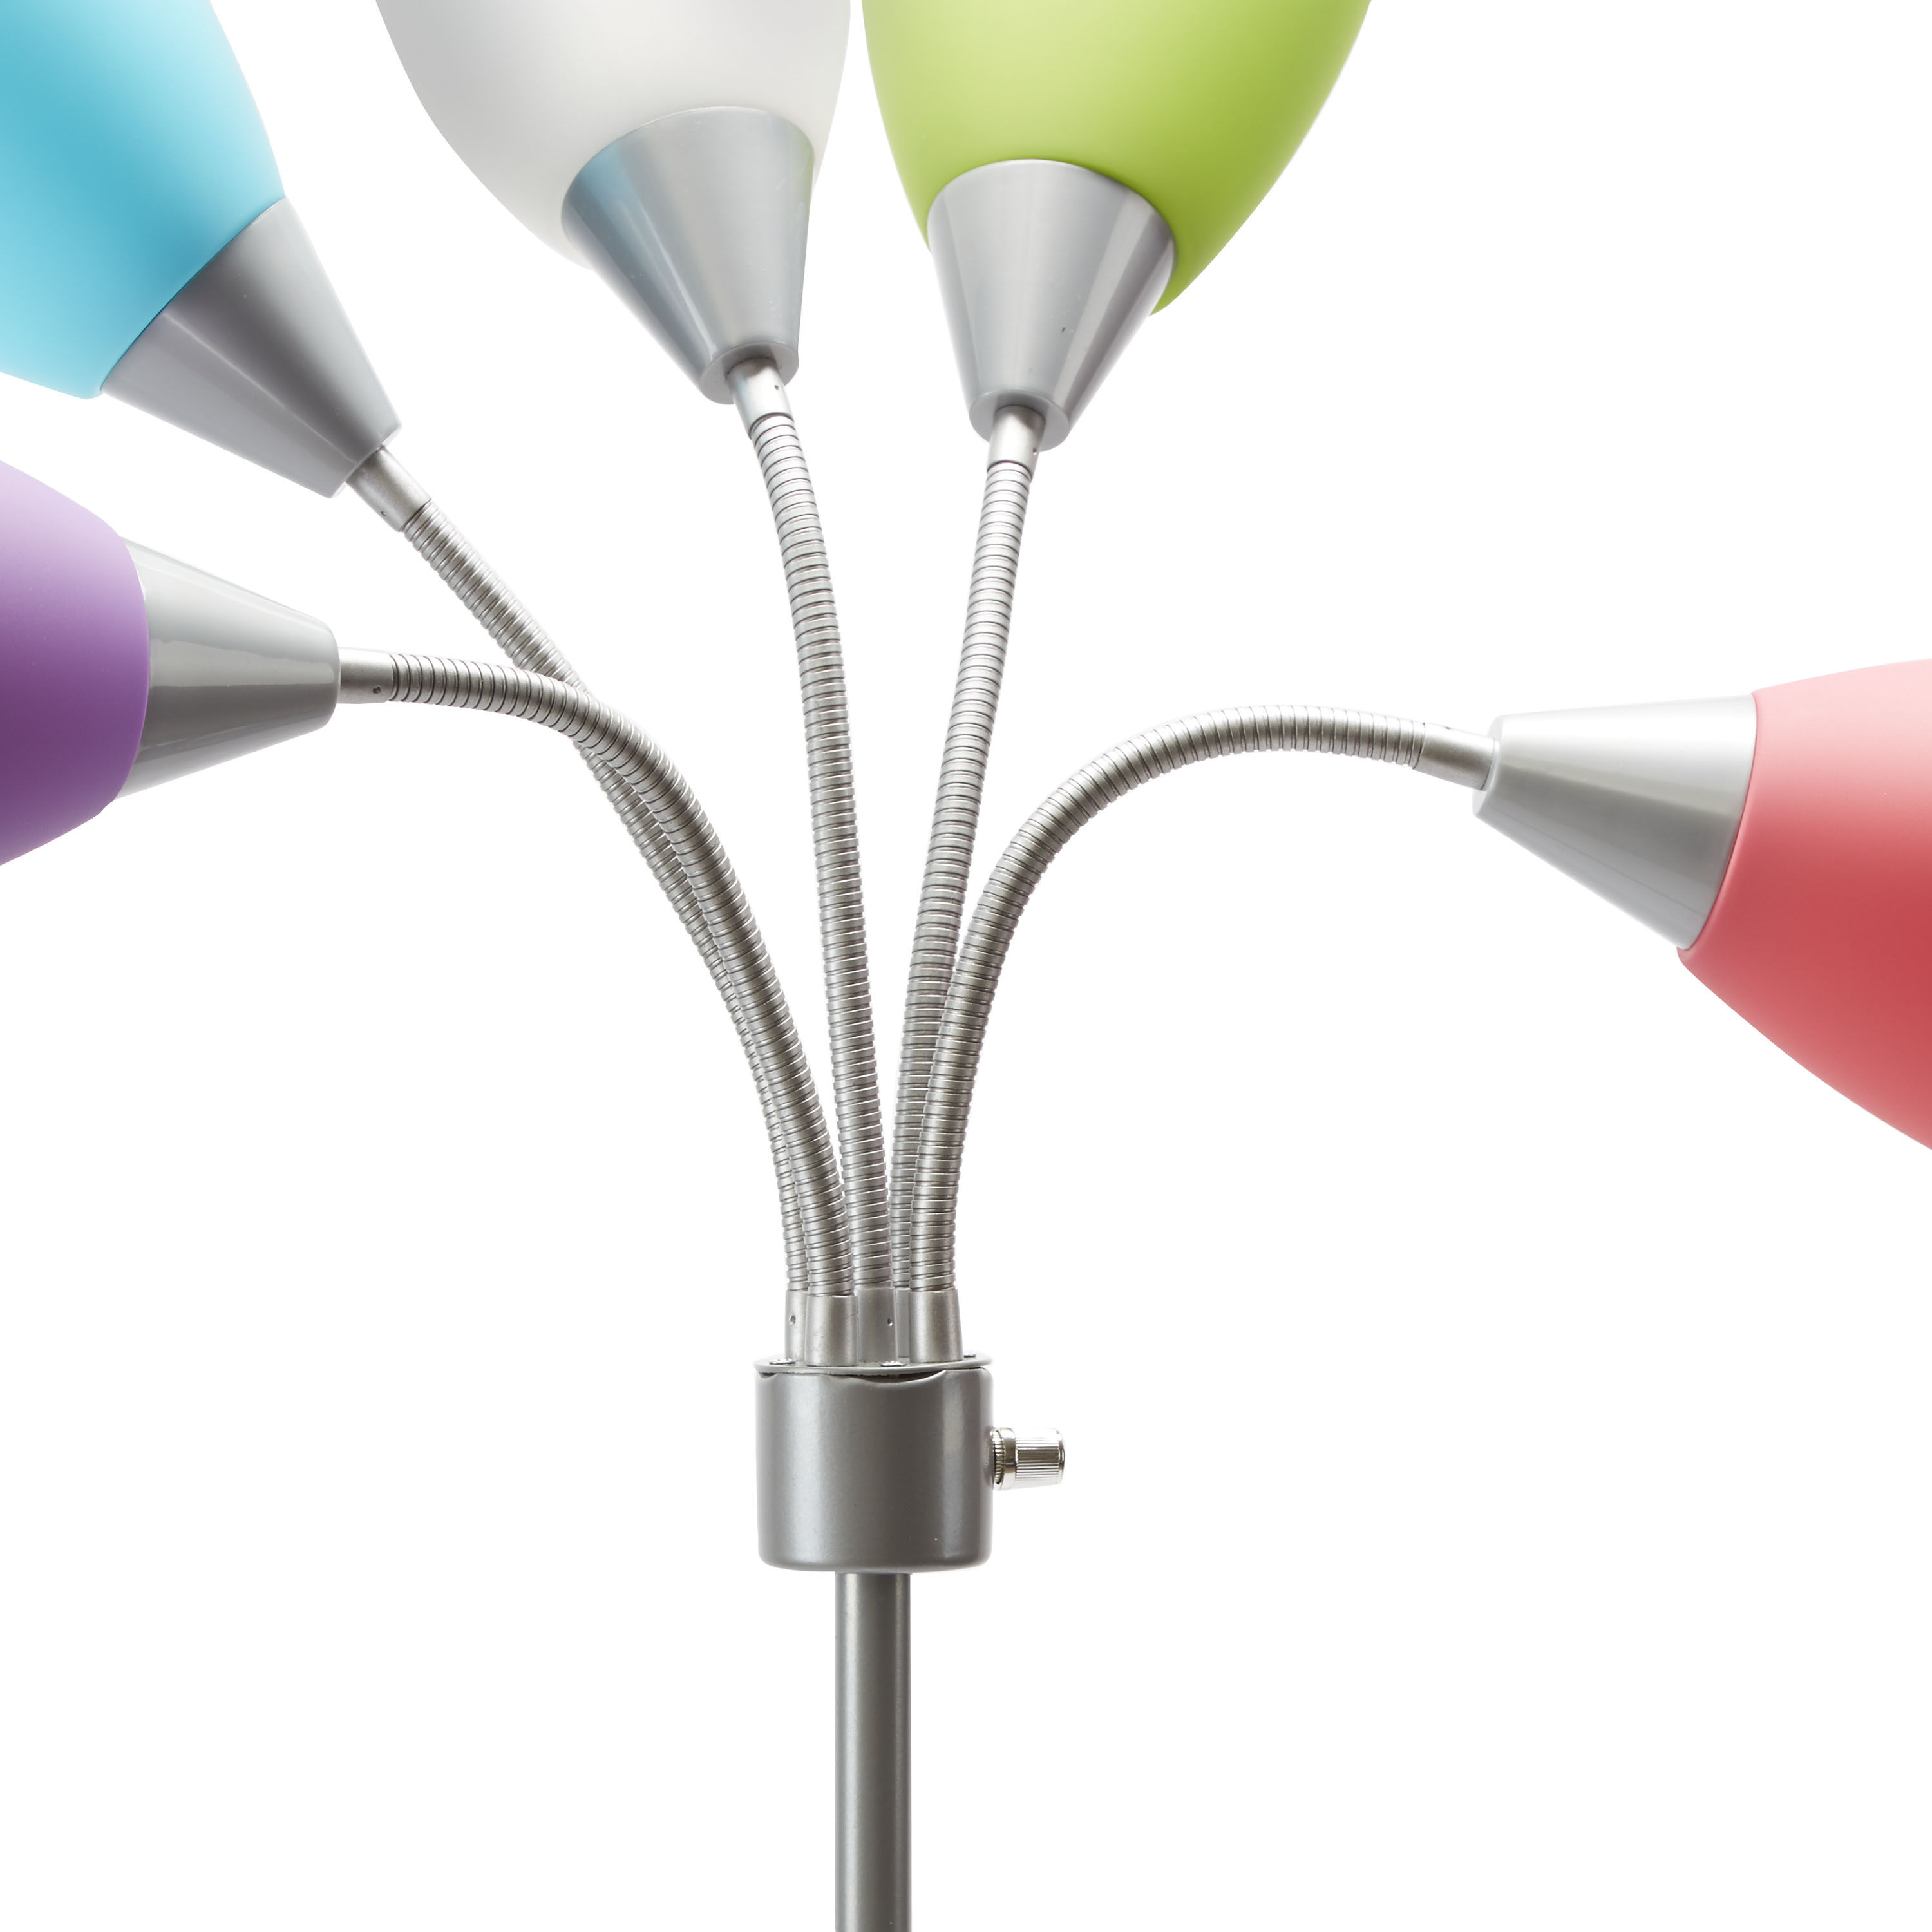 Mainstays 5 Light Floor Lamp, Silver Color with Multi Color Shades Made of Metal - image 4 of 6